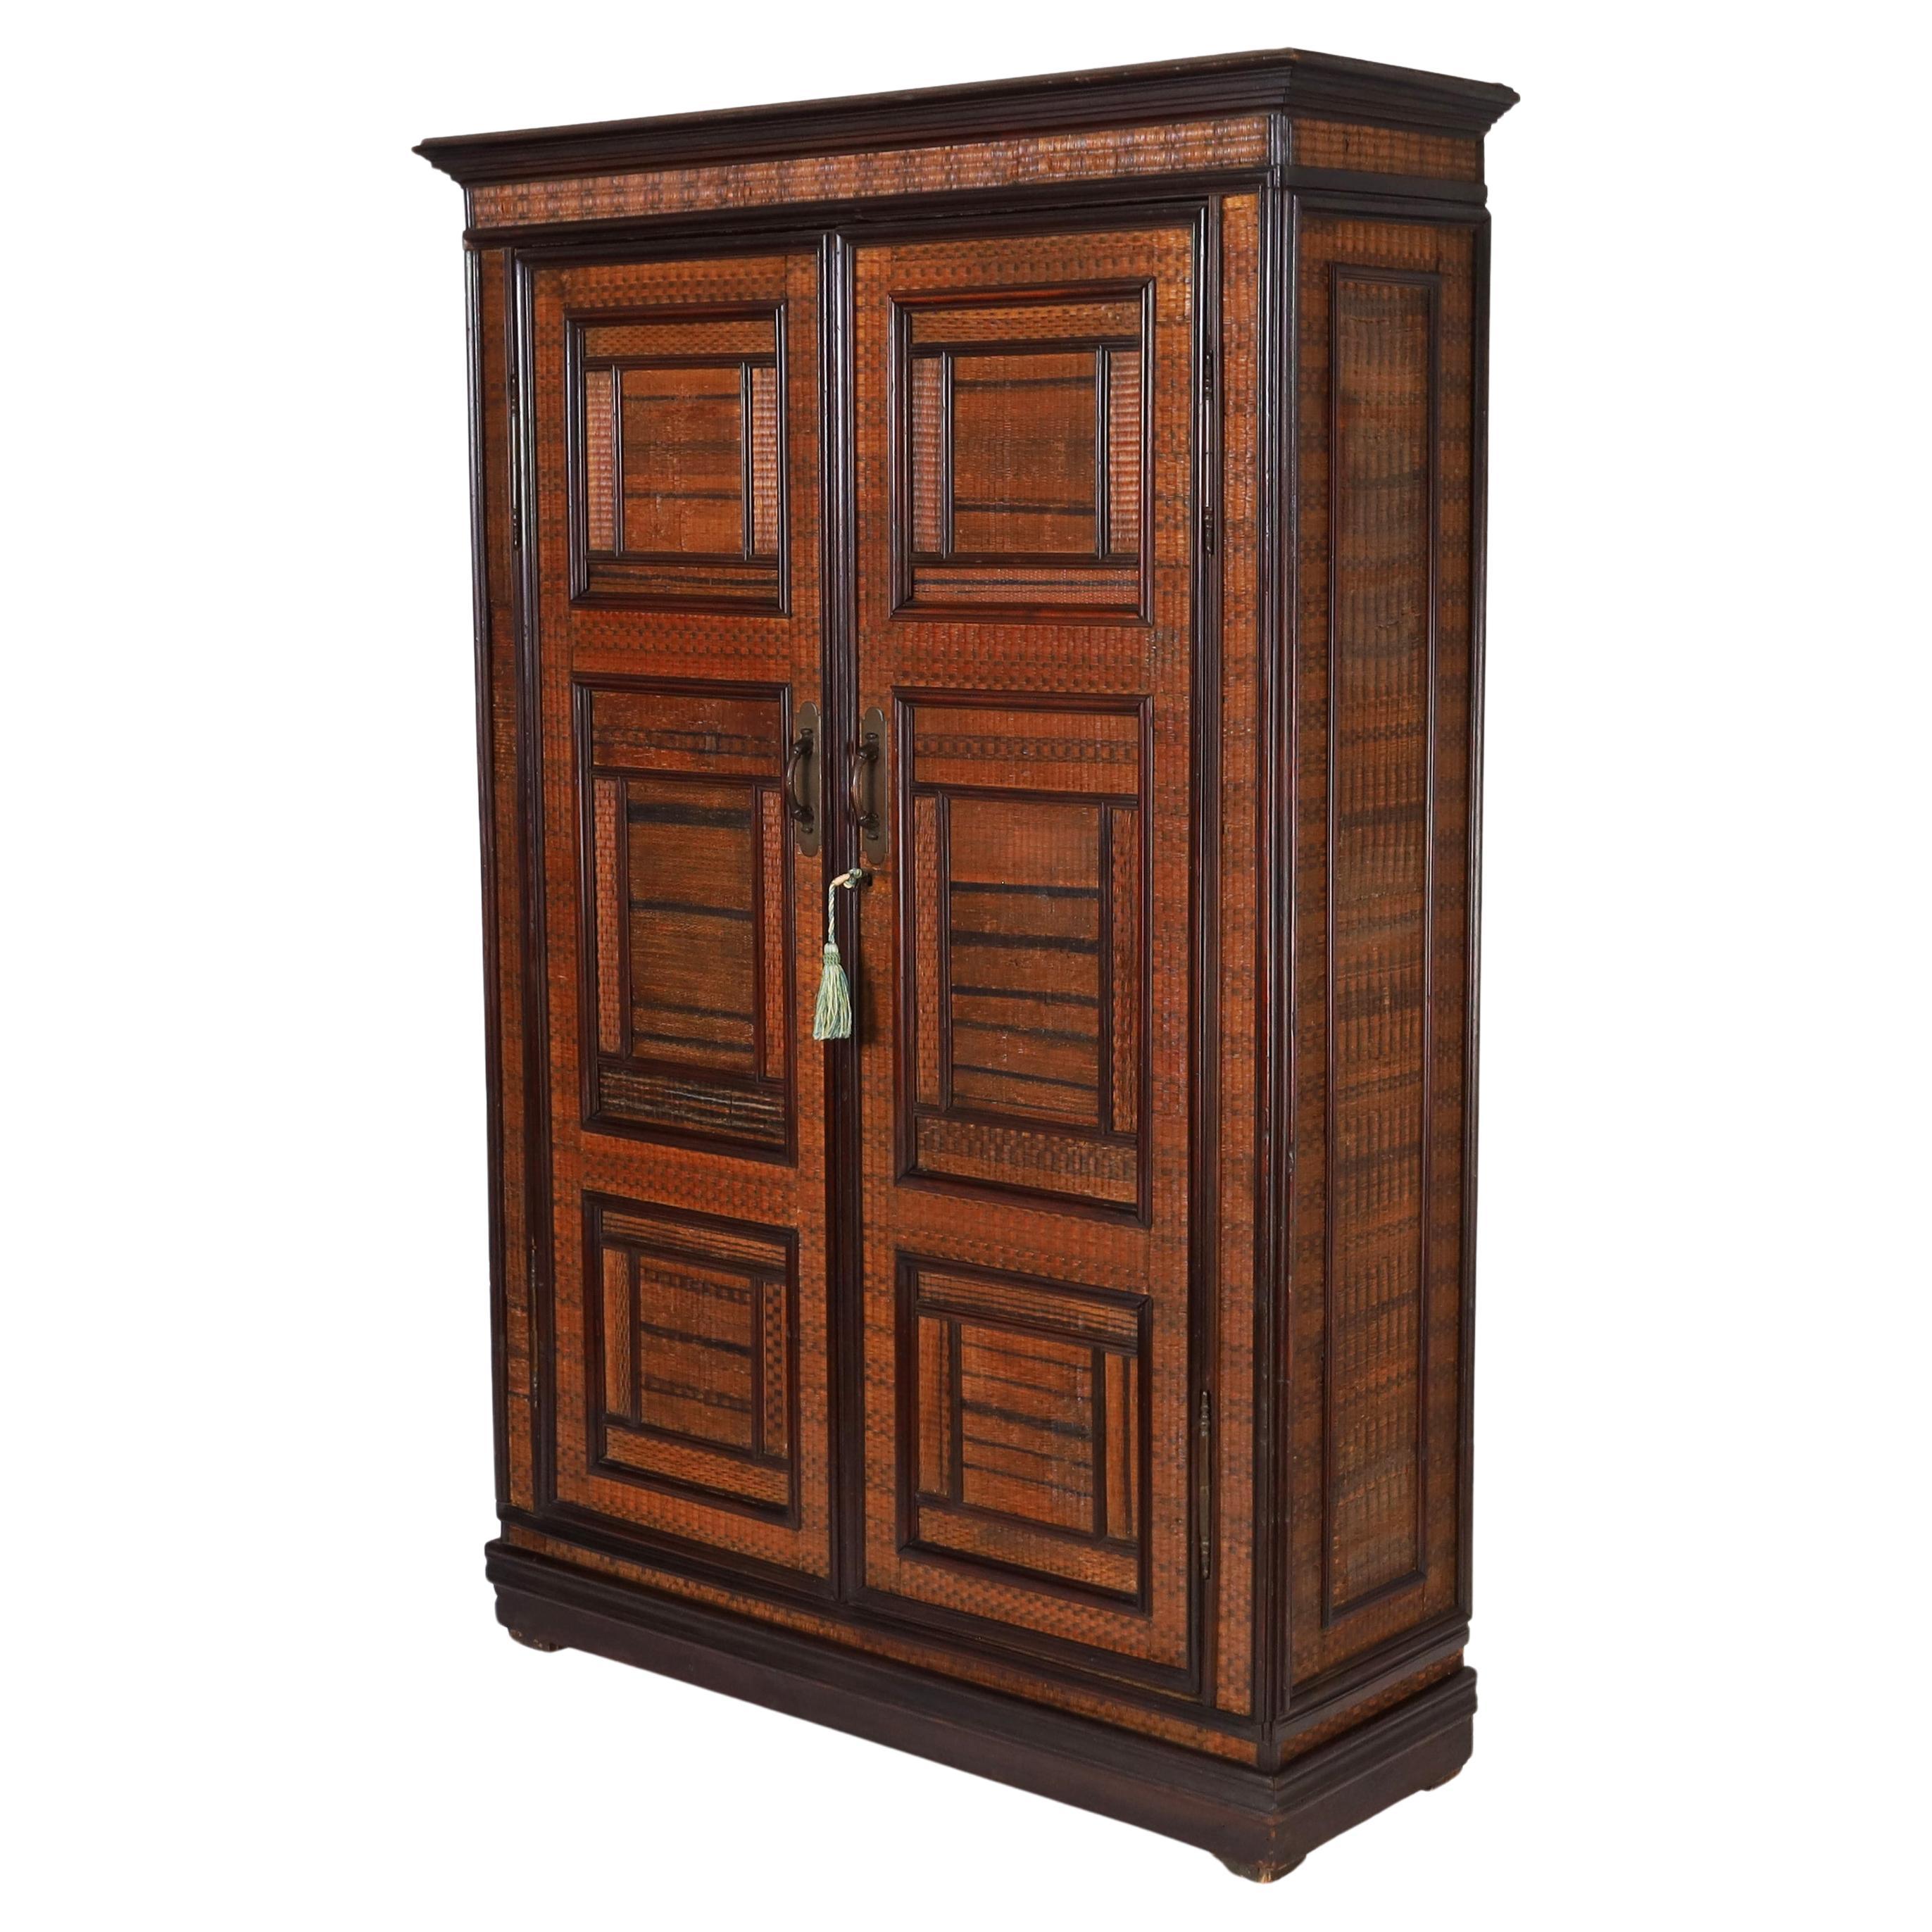 Impressive 19th century French cabinet with a case crafted in pine, having five adjustable shelves inside, and covered in woven reed featuring a cornice and geometric panels, bronze hardware, and block feet.